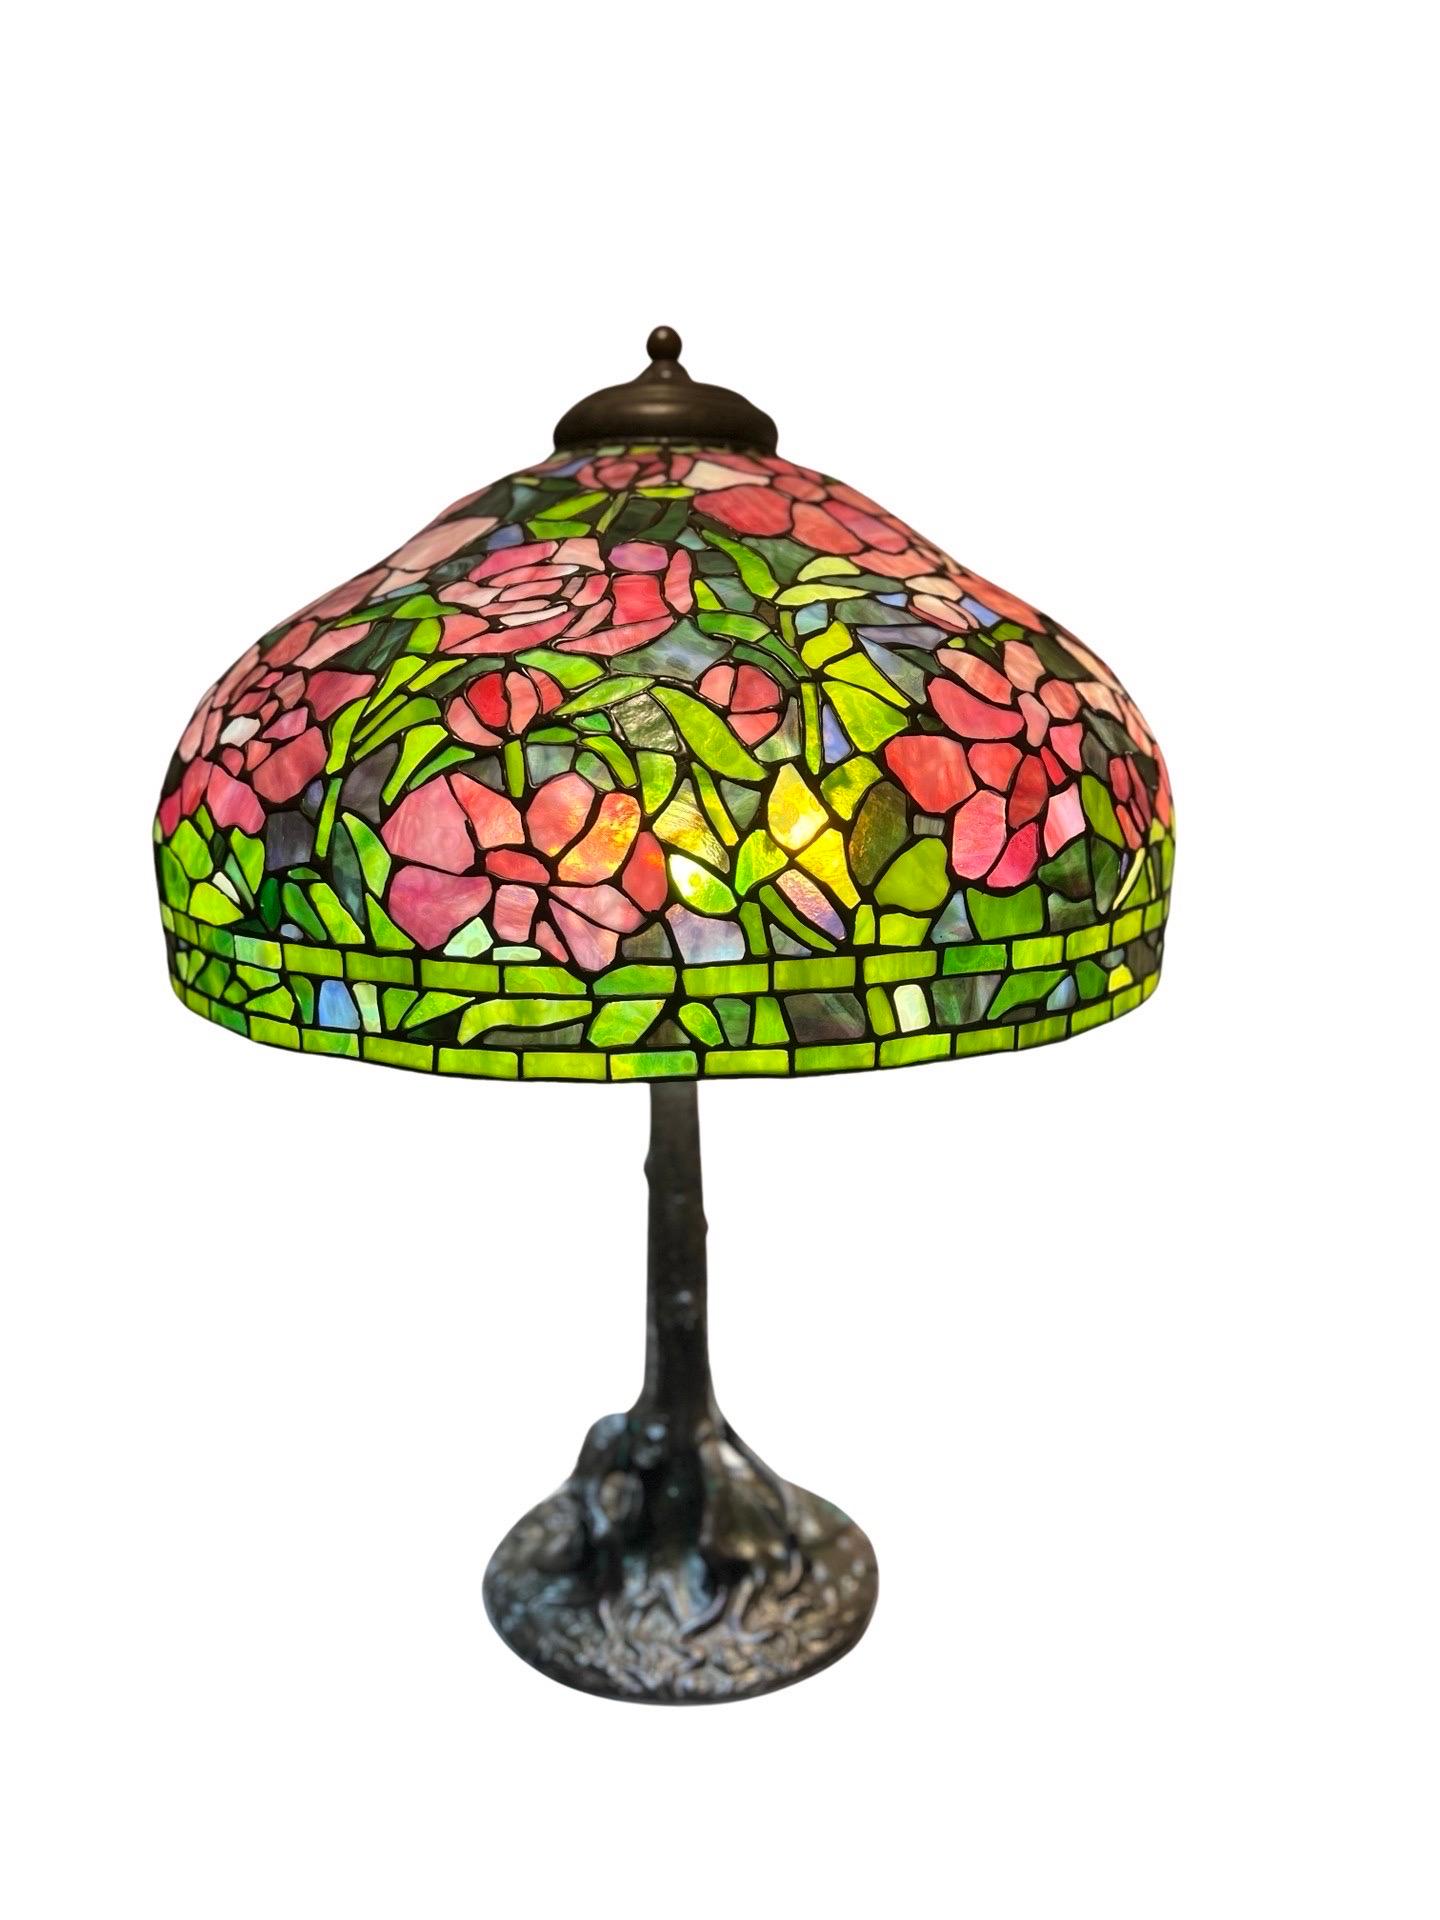 20th Century Unique Art Glass & Metal Company Leaded Glass Peony Table Lamp C. 1915 For Sale